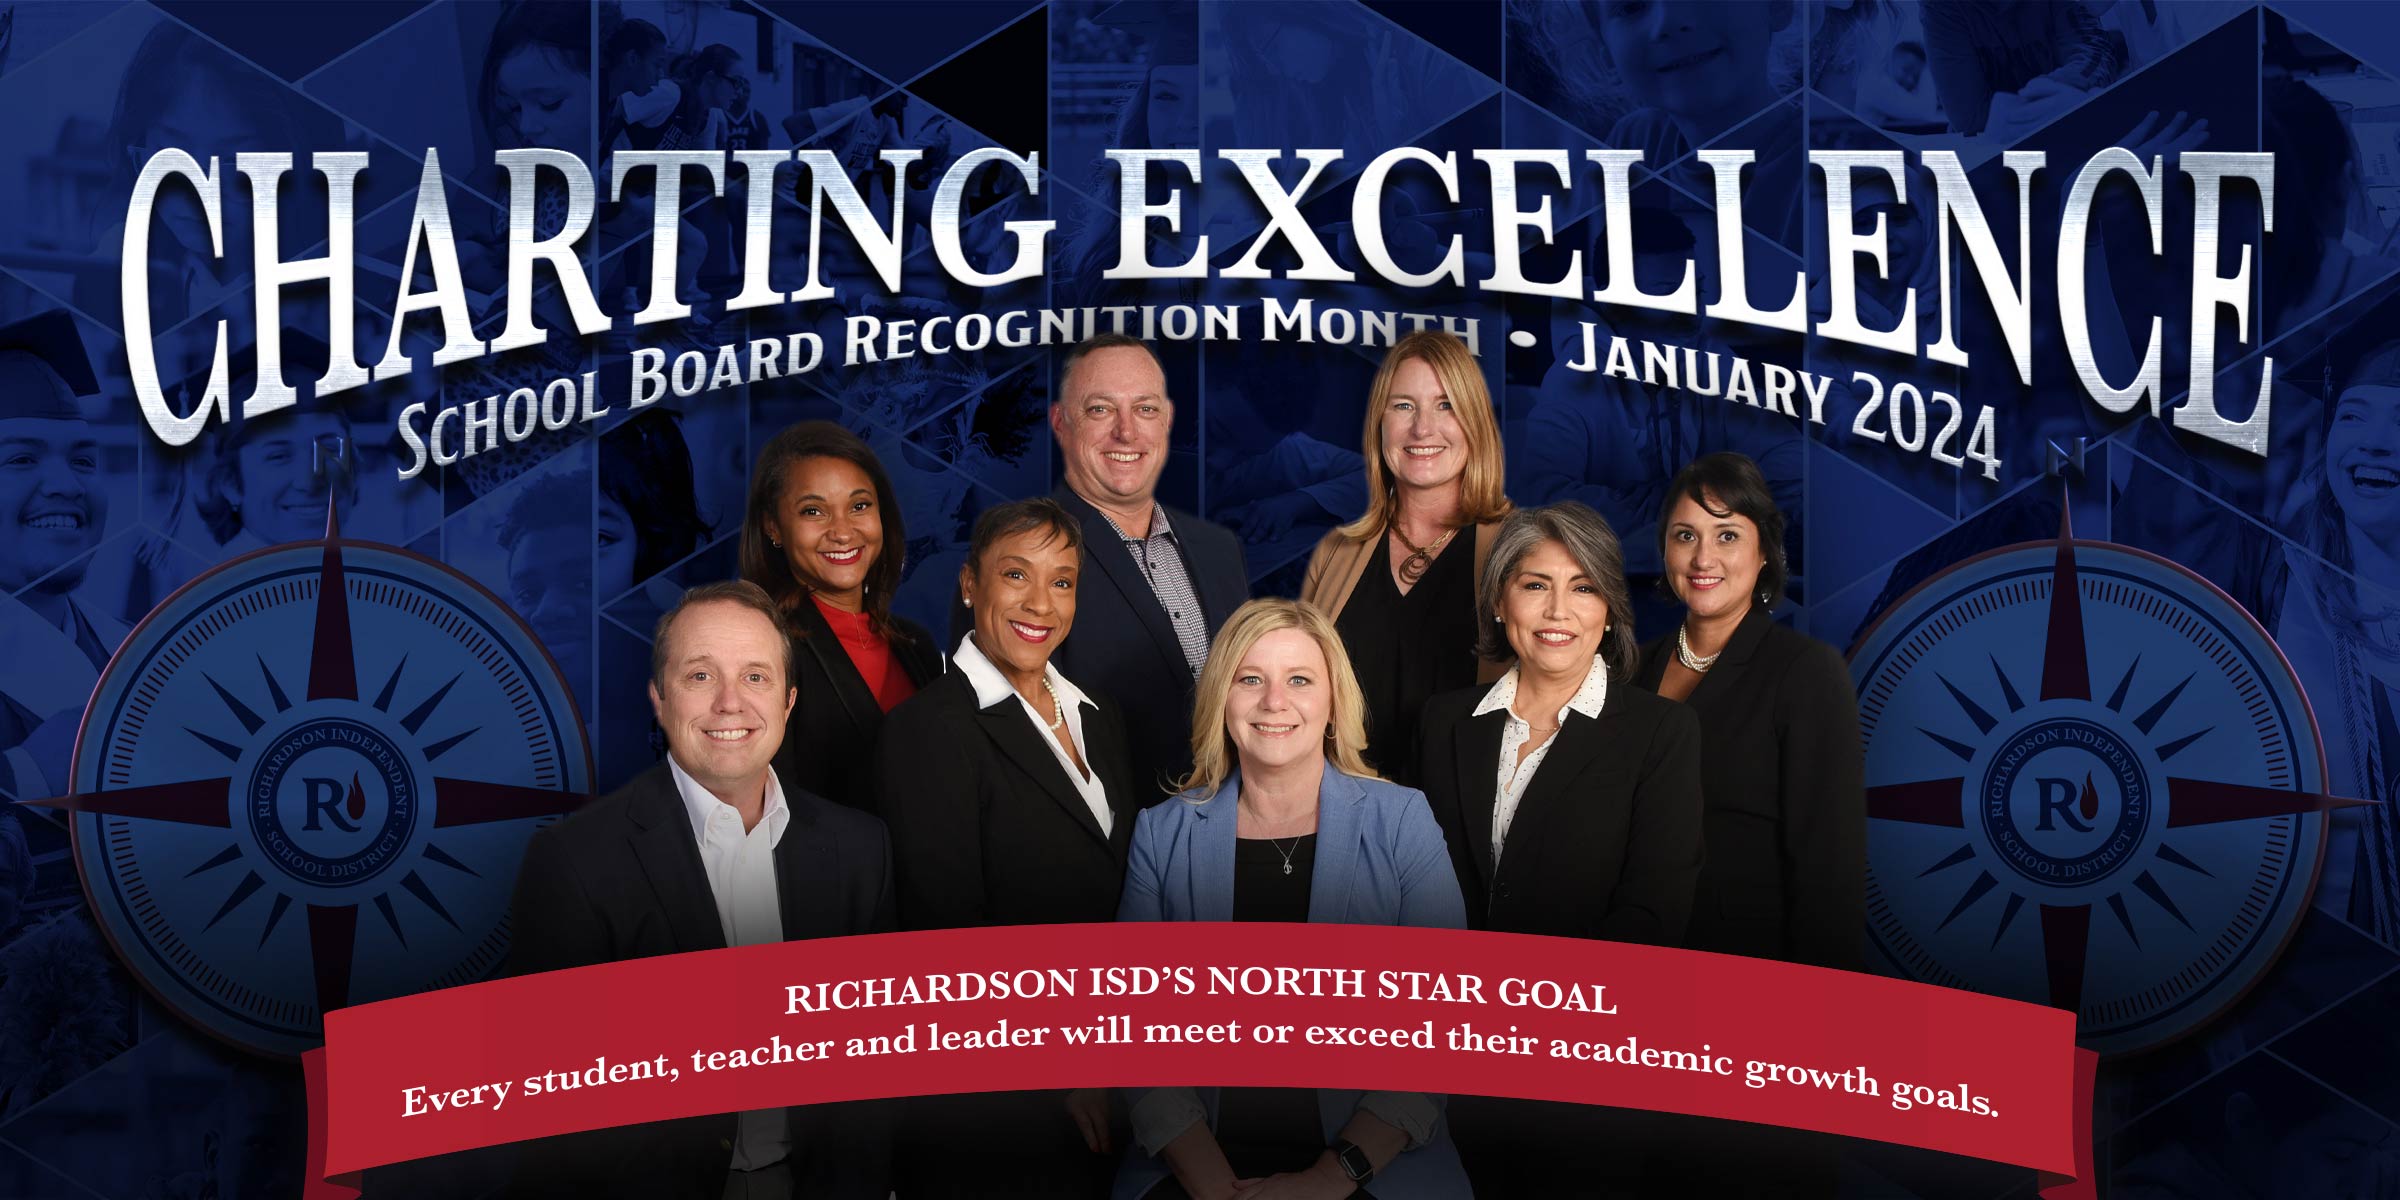 Charting excellence school board recognition month January 2024